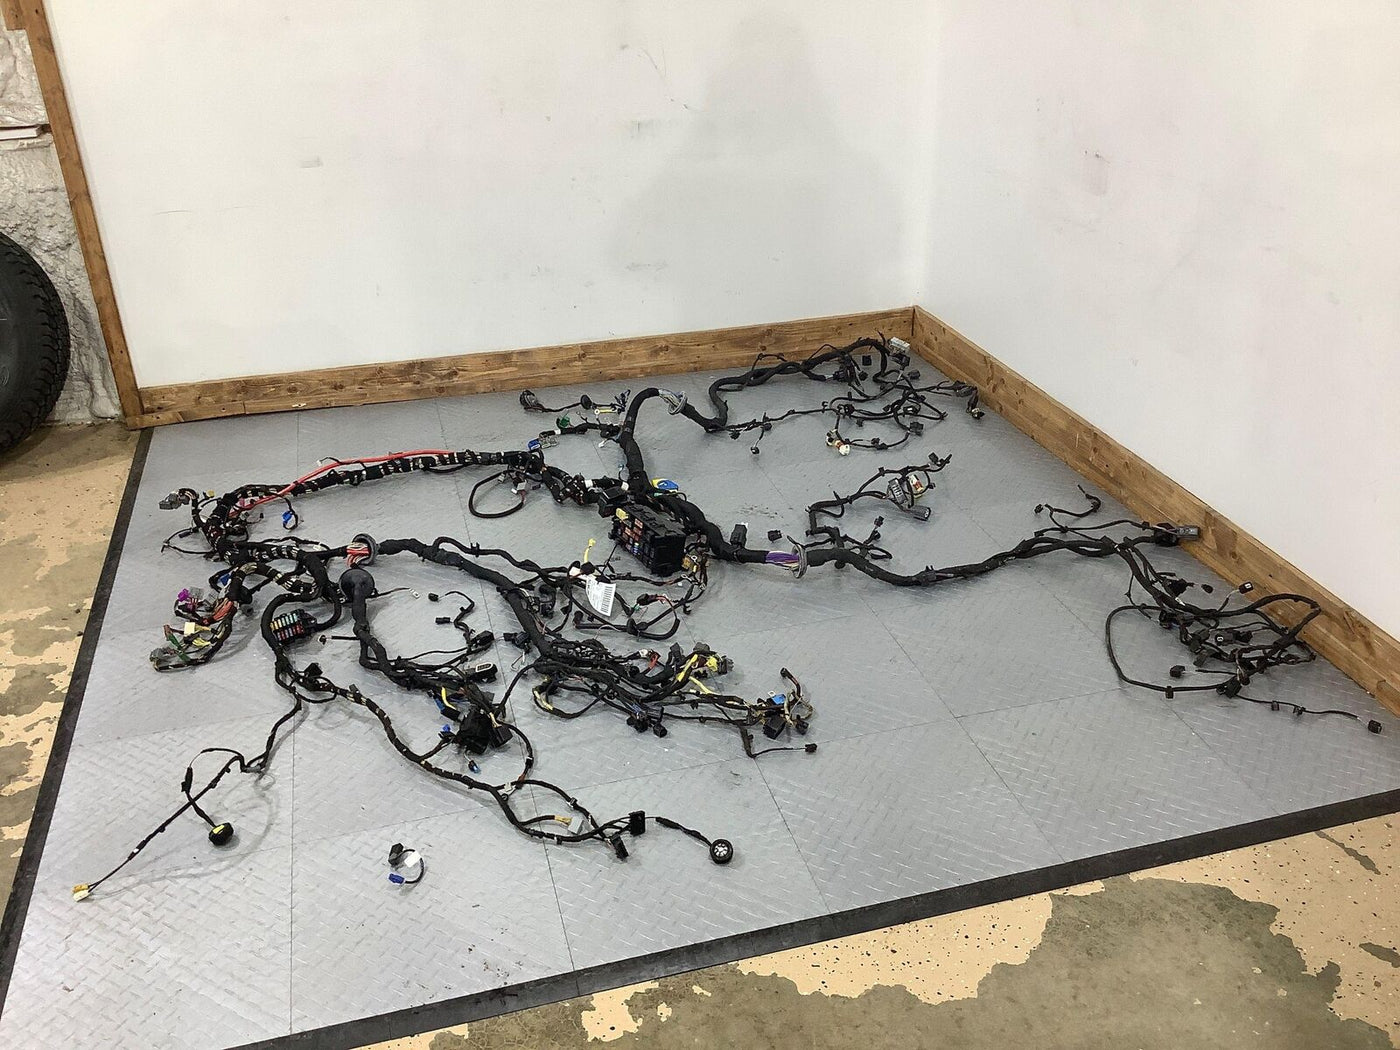 2020 McLaren 570S Spider Body Chassis Wiring Harness OCM LHD OEM (13MA258CP)